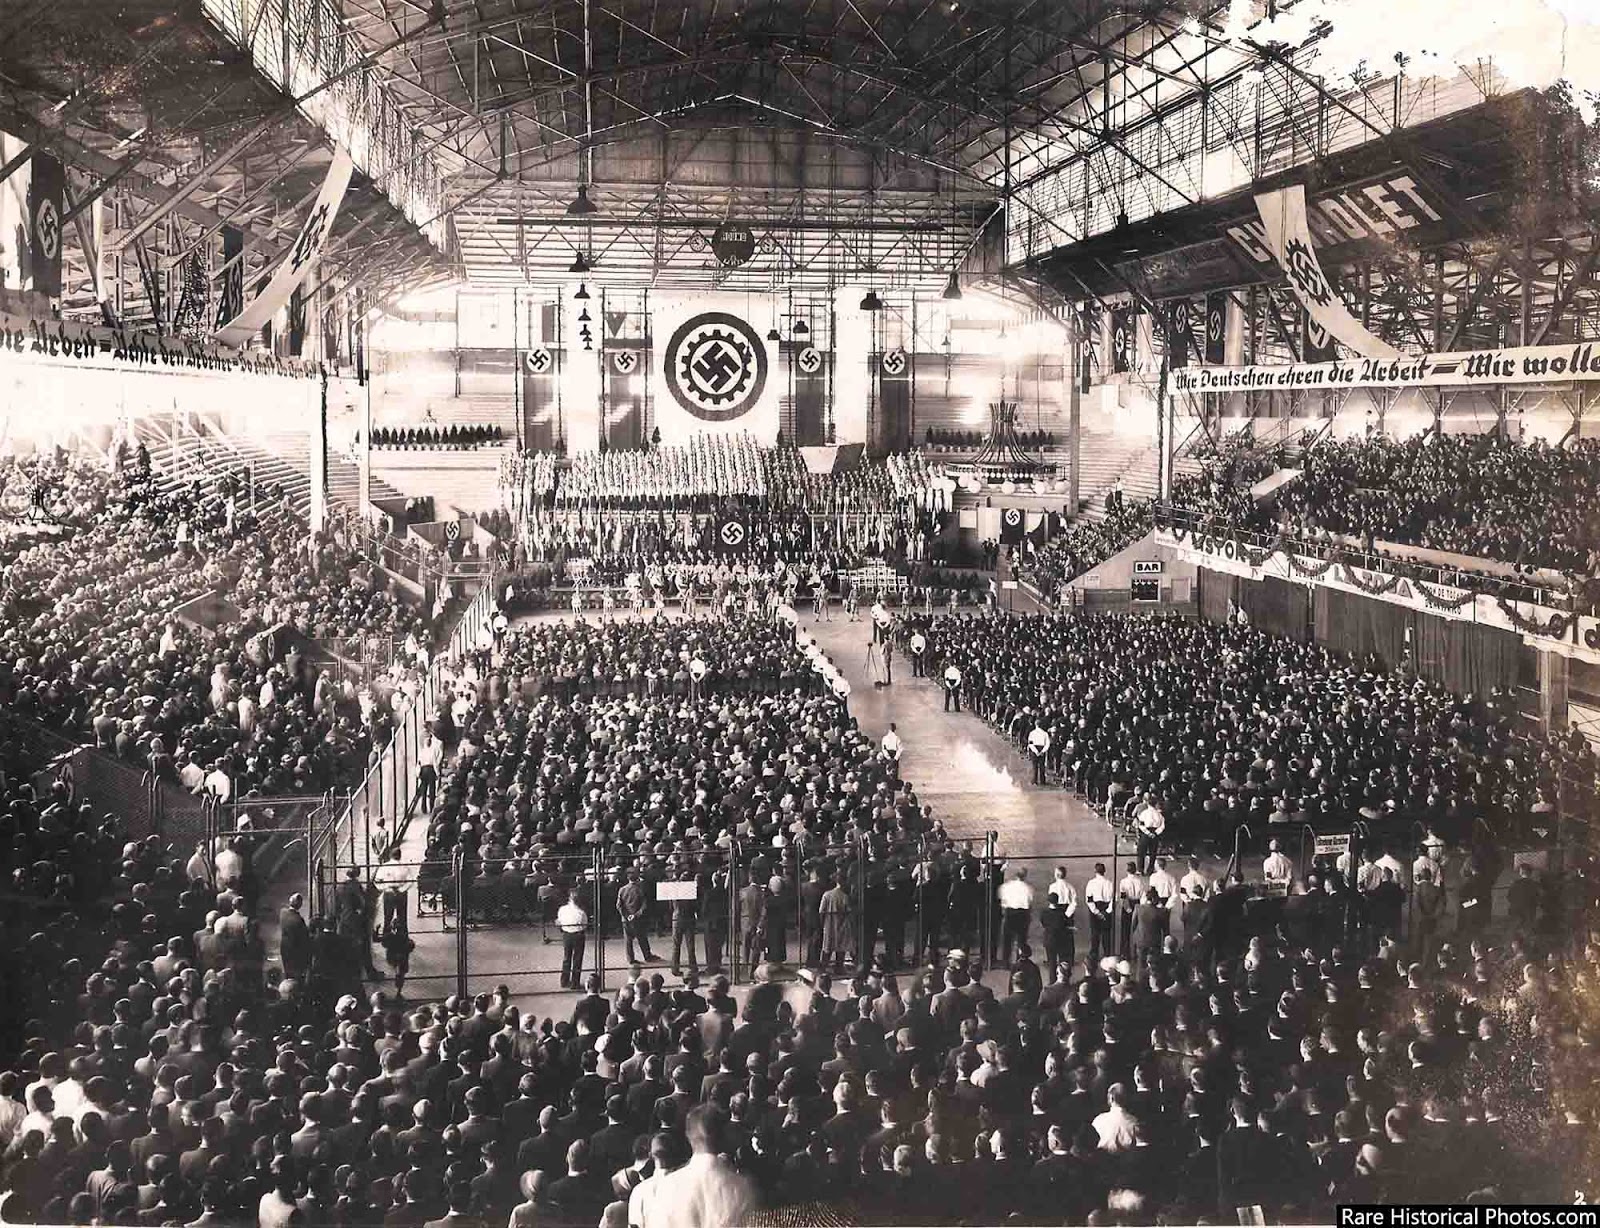 Nazi rally in Buenos Aires, April 10, 1938.